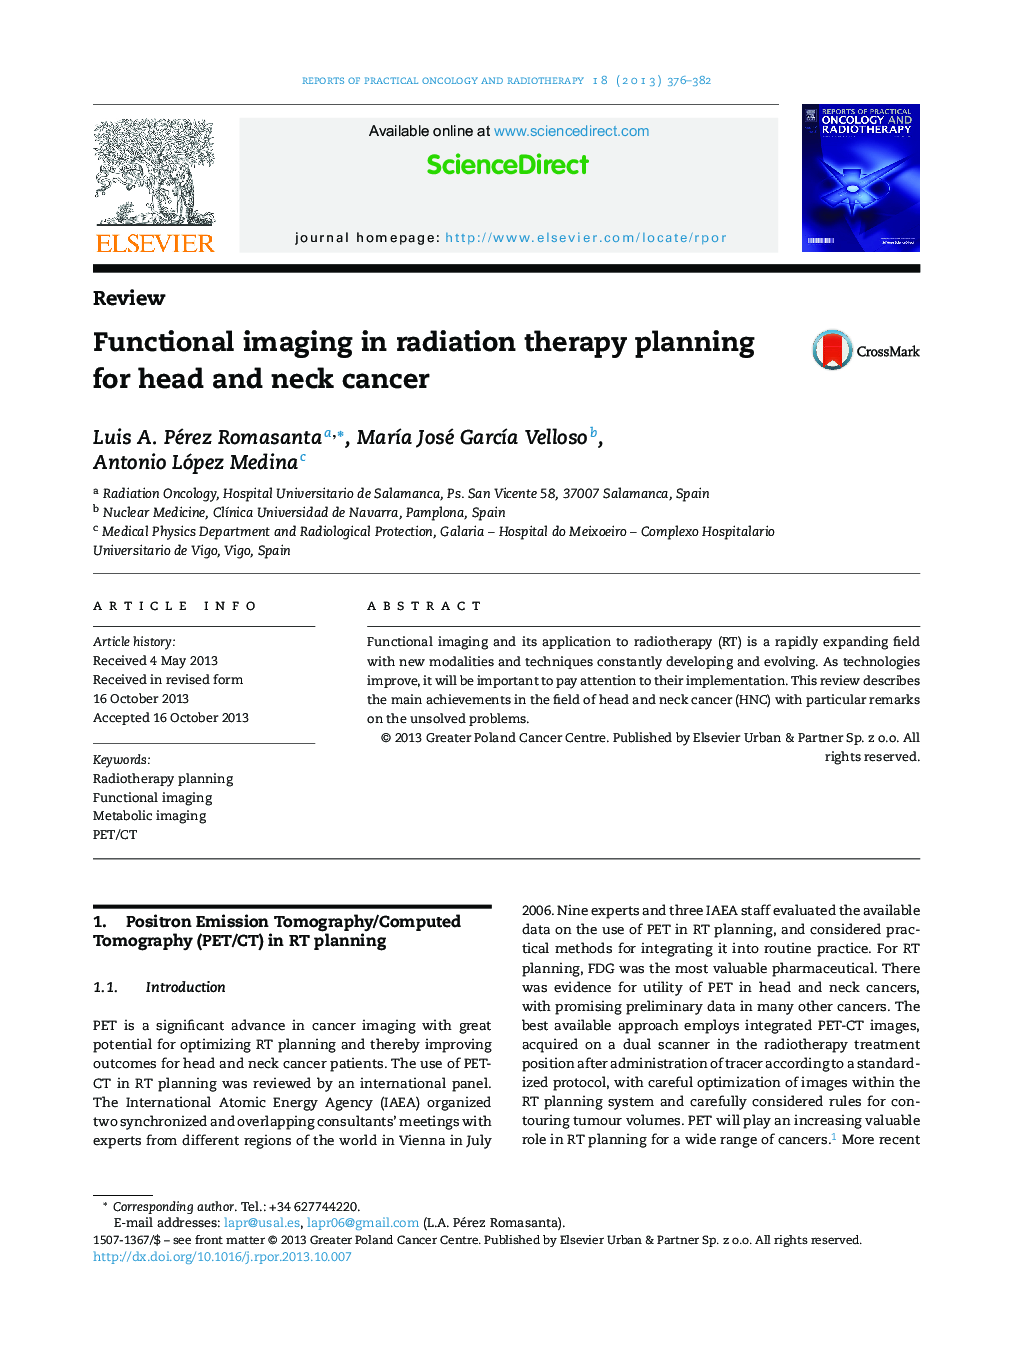 Functional imaging in radiation therapy planning for head and neck cancer